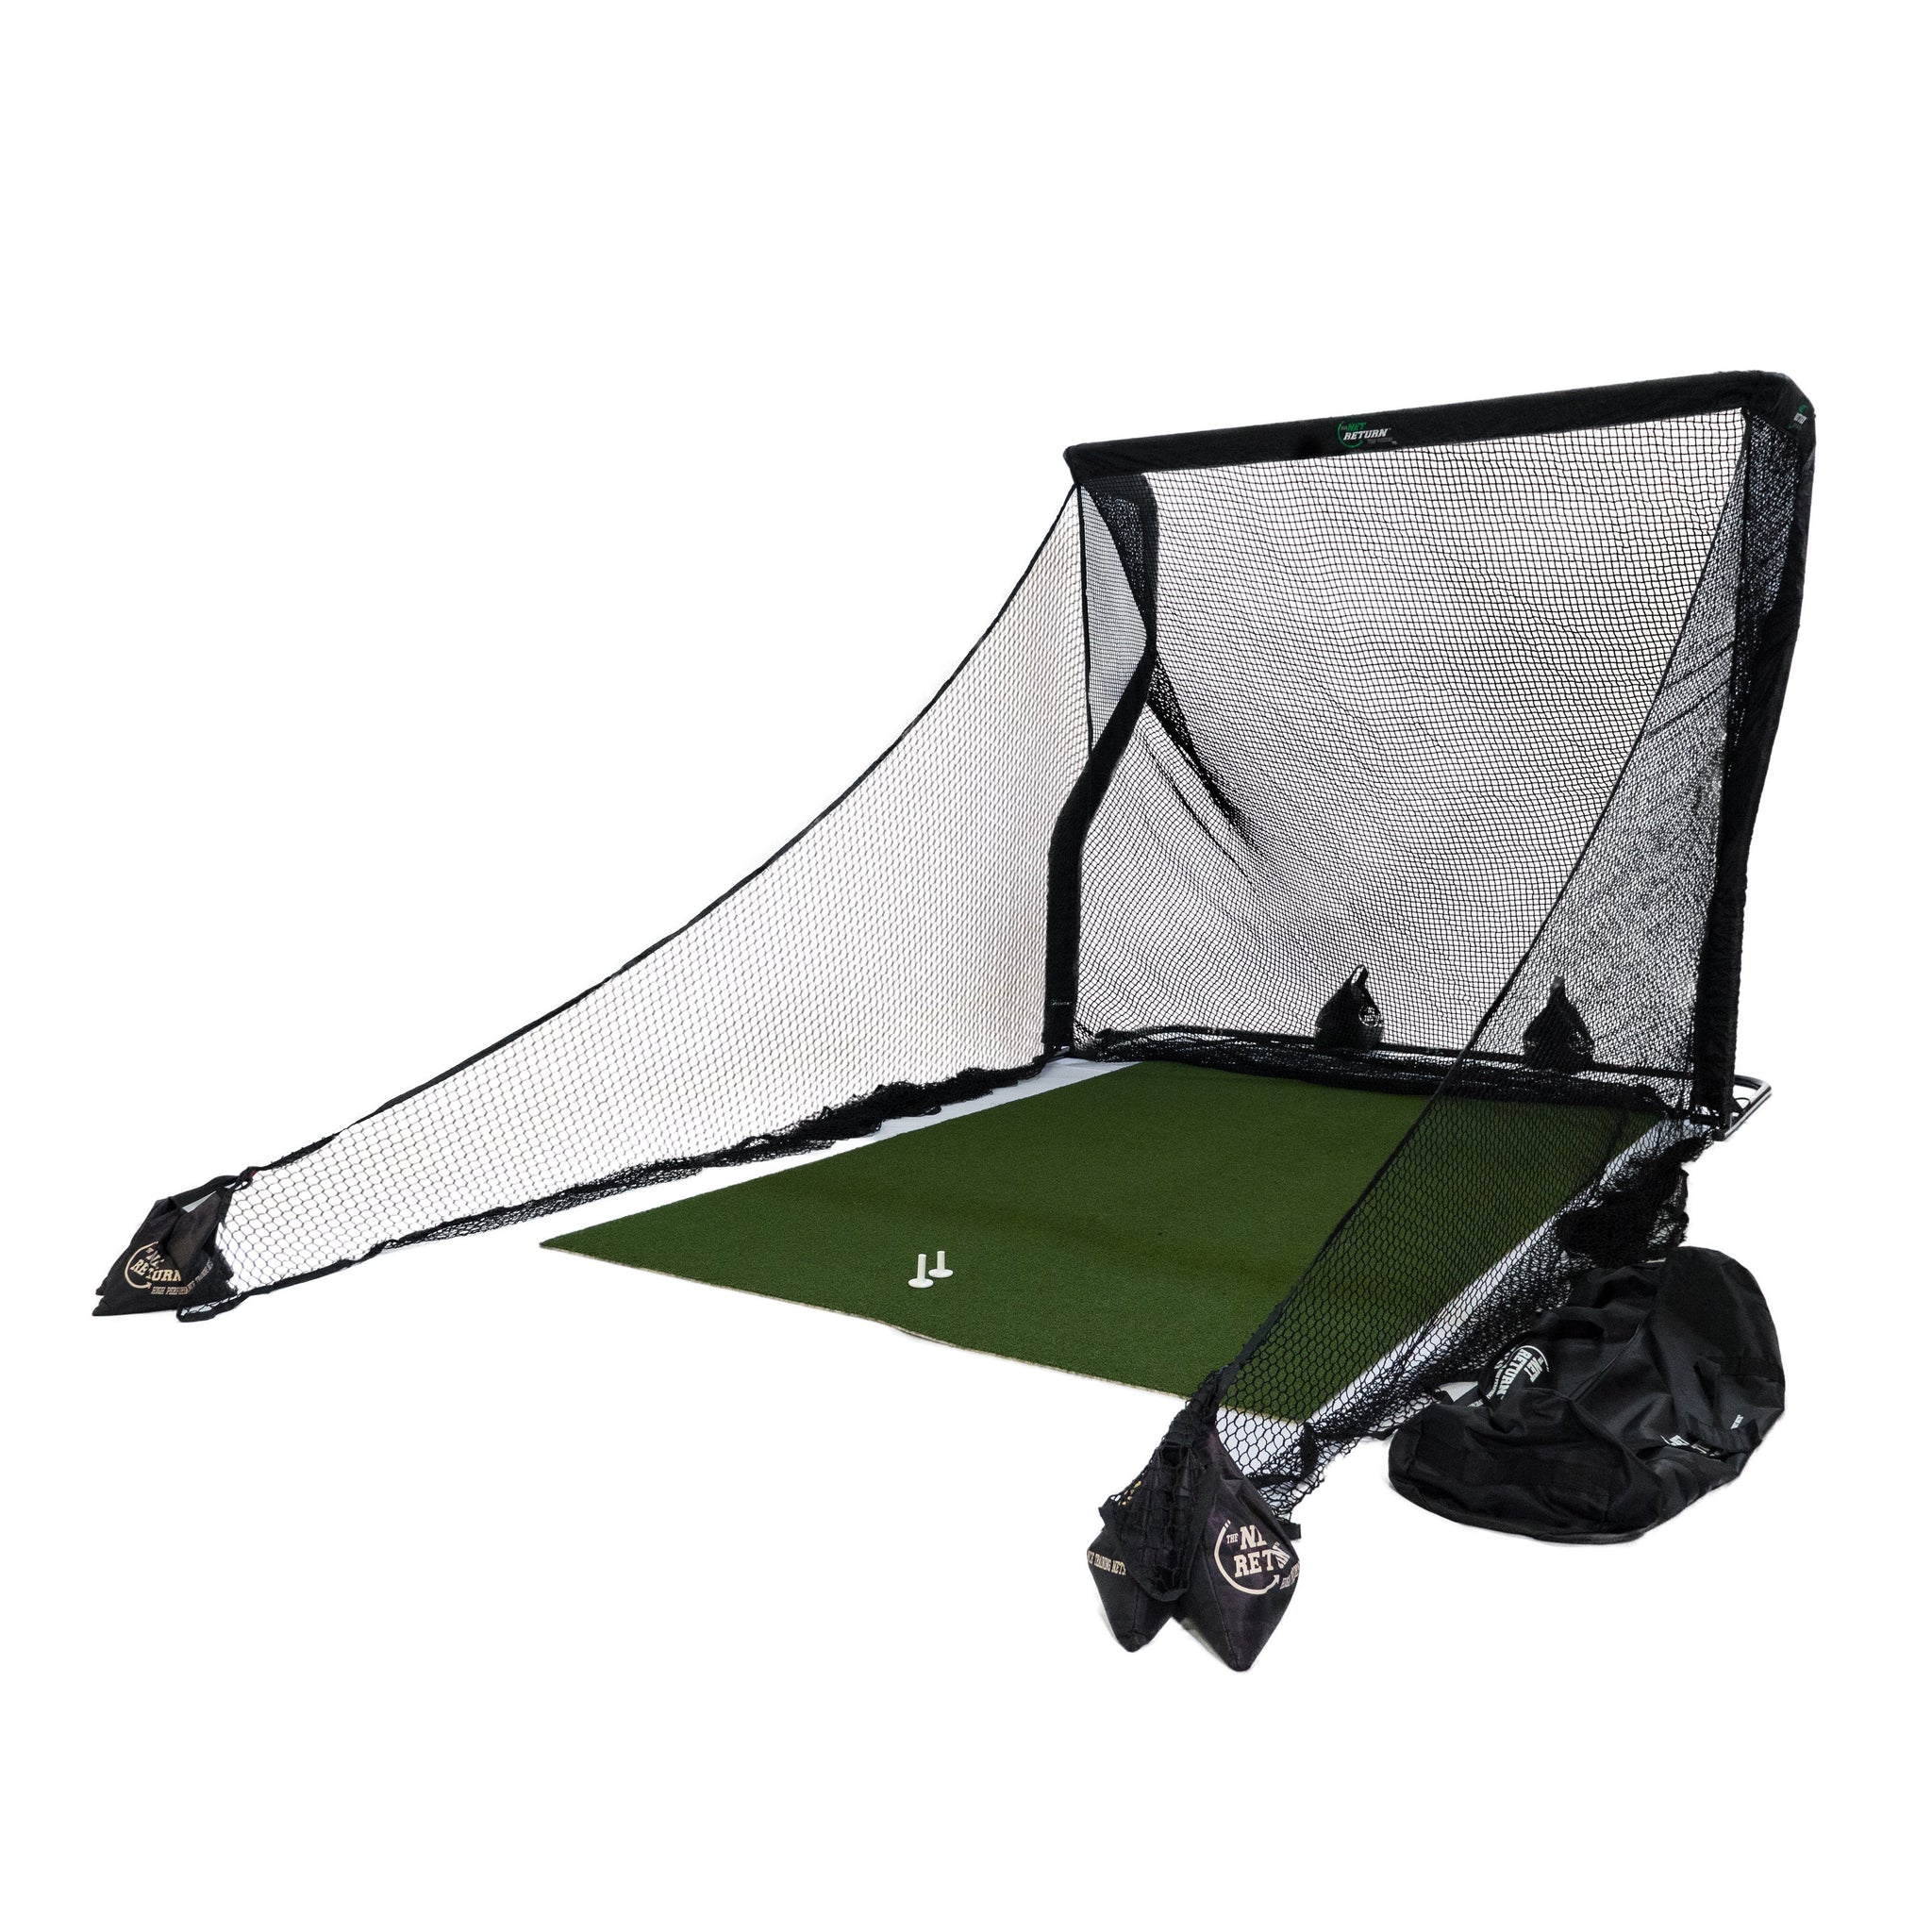 Home Series V2 Package - Golf Net - Indoor and Outdoor Golf Setup - Golf at home - The Net Return Europe